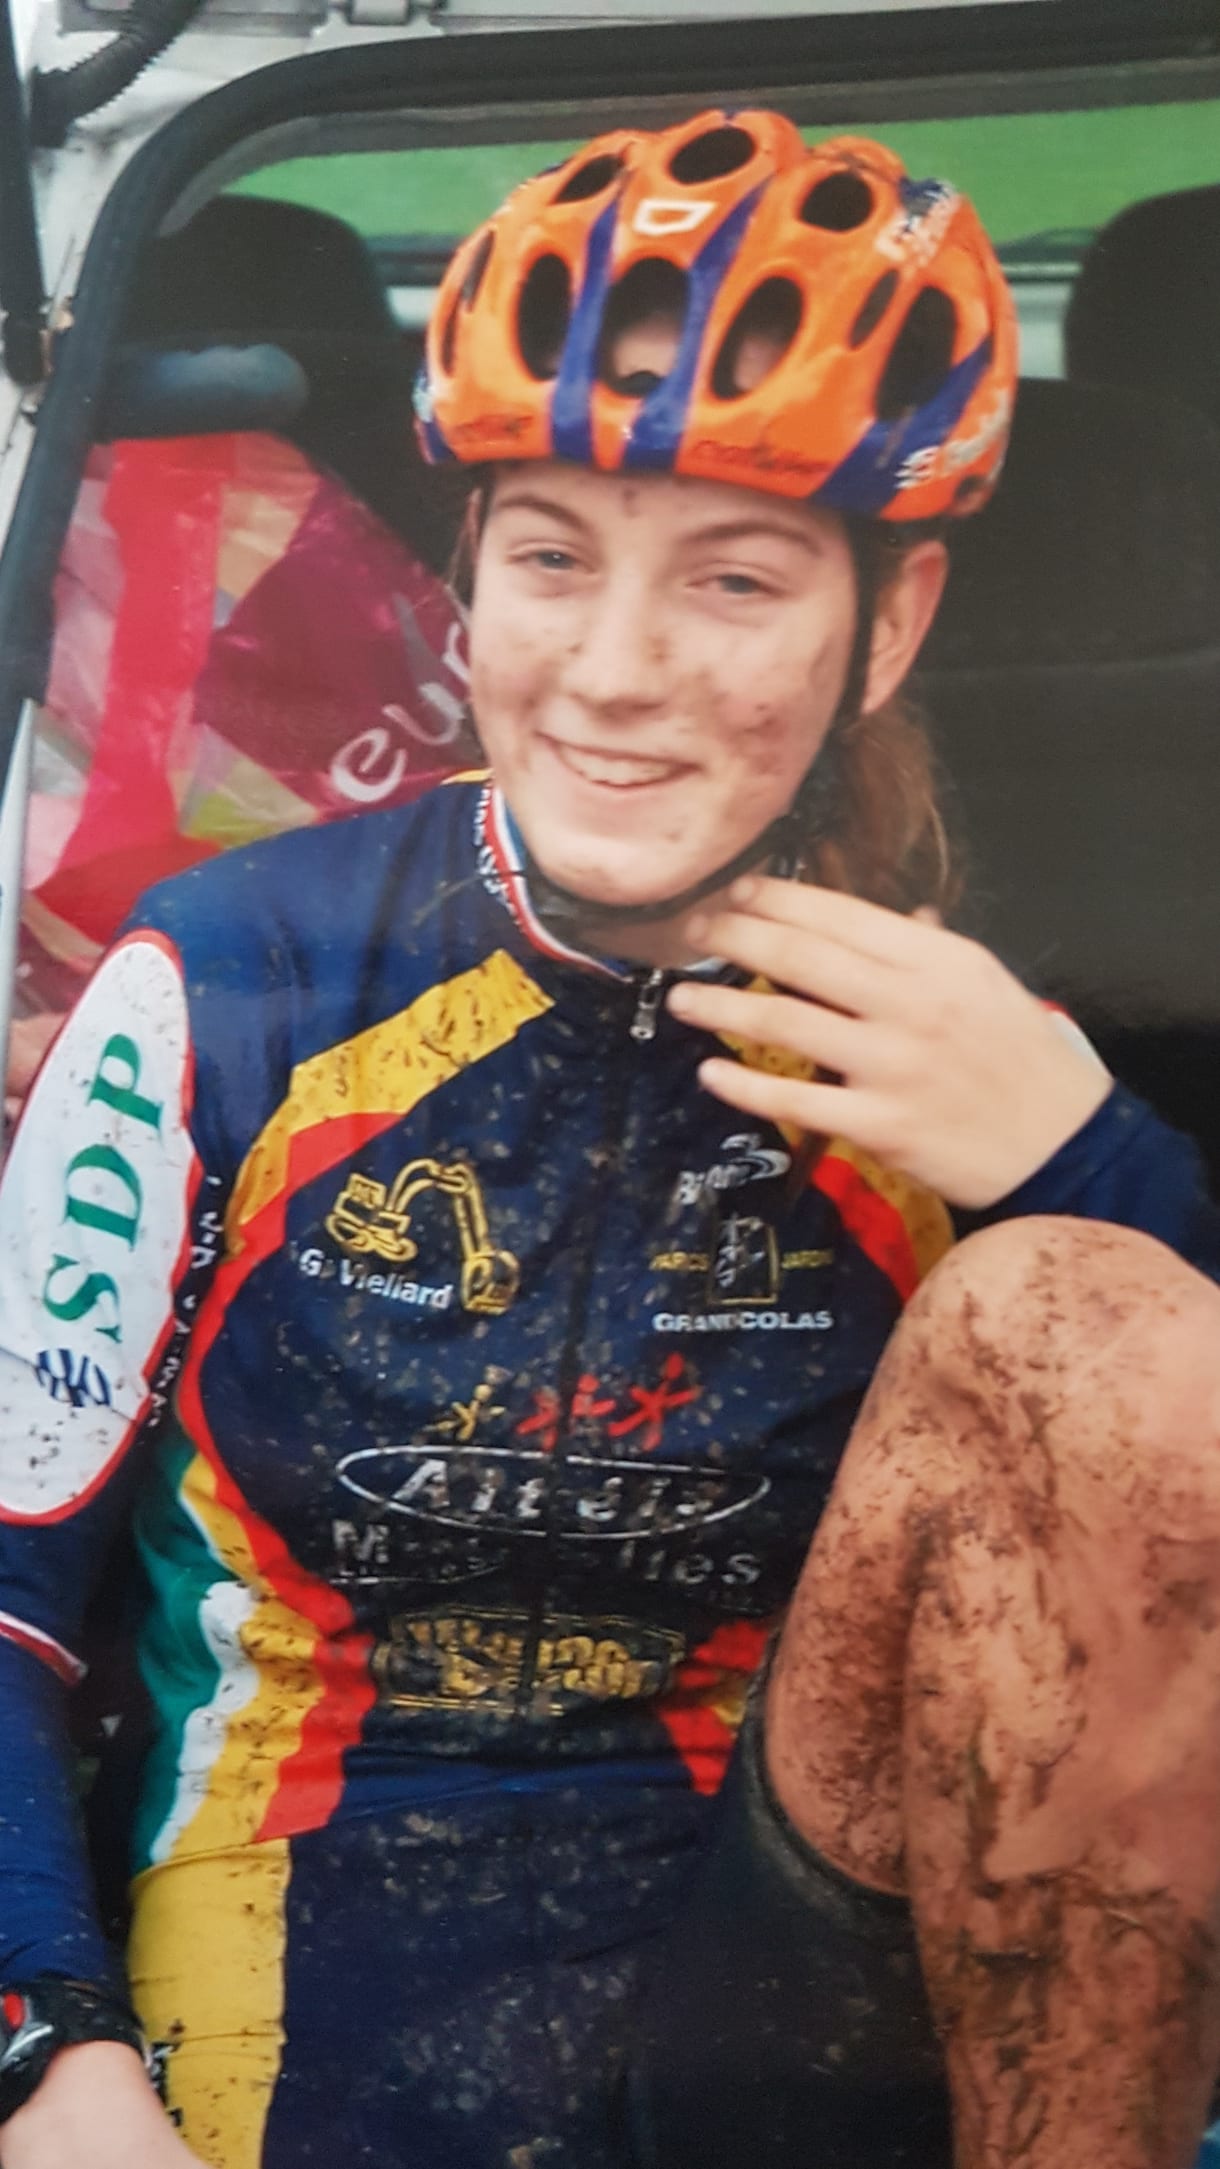 French bike athlete Pauline Ferrand-Prévot pictured following a mountain bike event when she was a teenager.